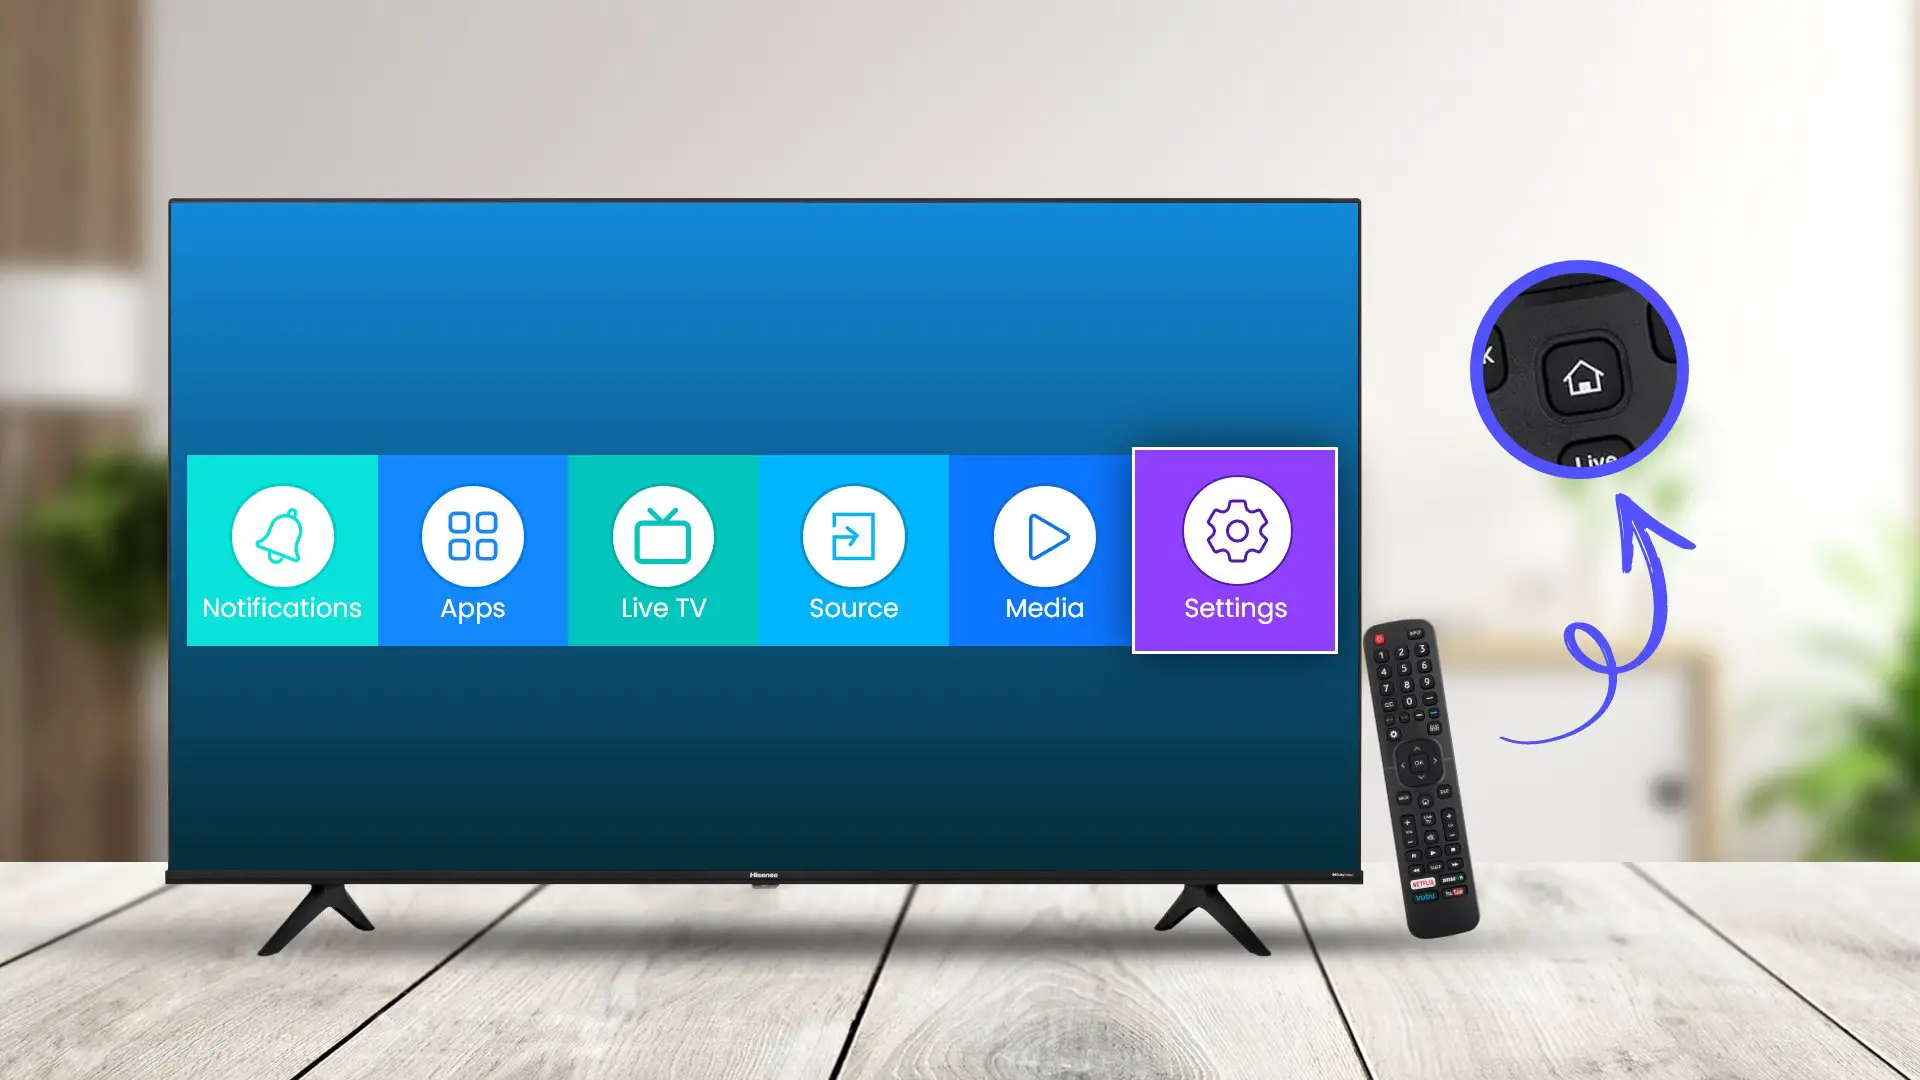 How to connect Hisense TV to WiFi - Steps 